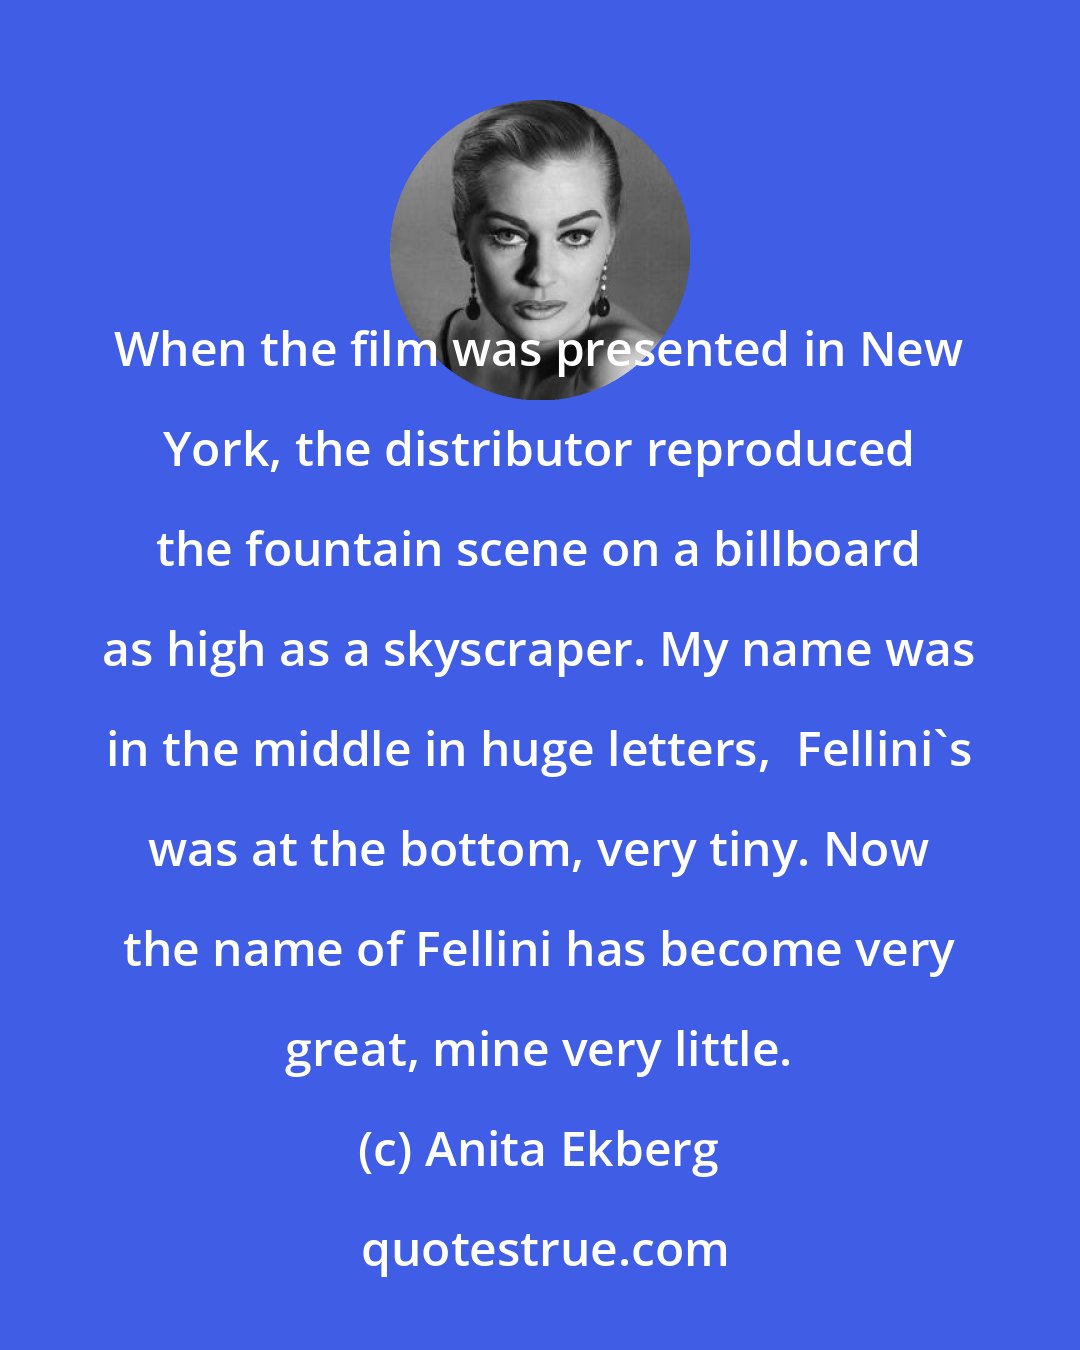 Anita Ekberg: When the film was presented in New York, the distributor reproduced the fountain scene on a billboard as high as a skyscraper. My name was in the middle in huge letters,  Fellini's was at the bottom, very tiny. Now the name of Fellini has become very great, mine very little.